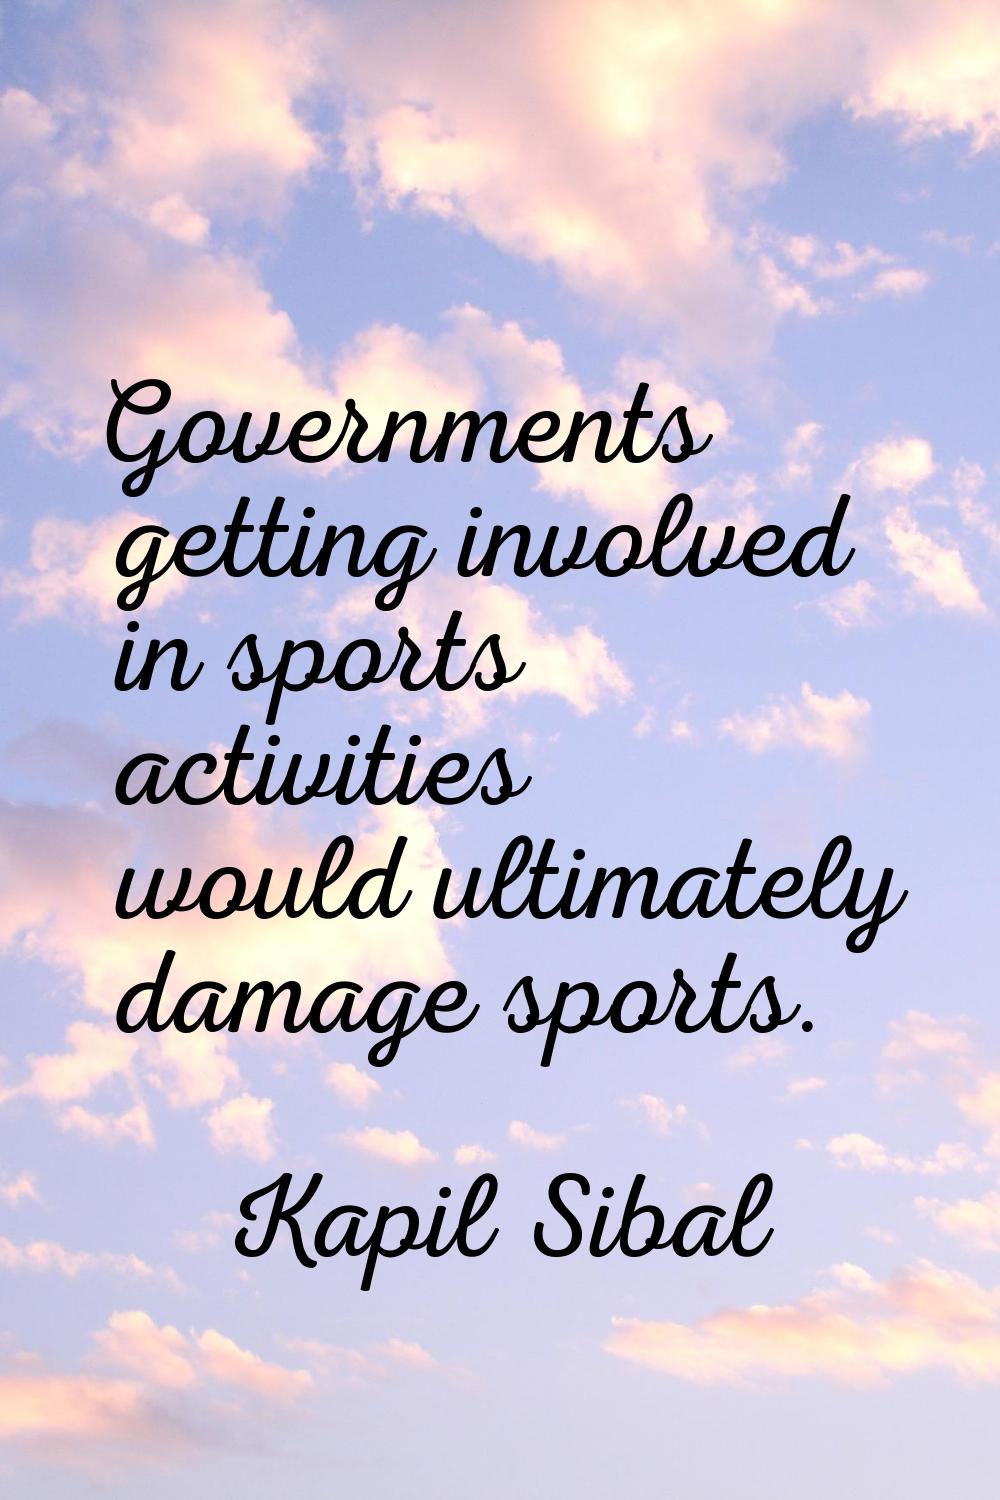 Governments getting involved in sports activities would ultimately damage sports.